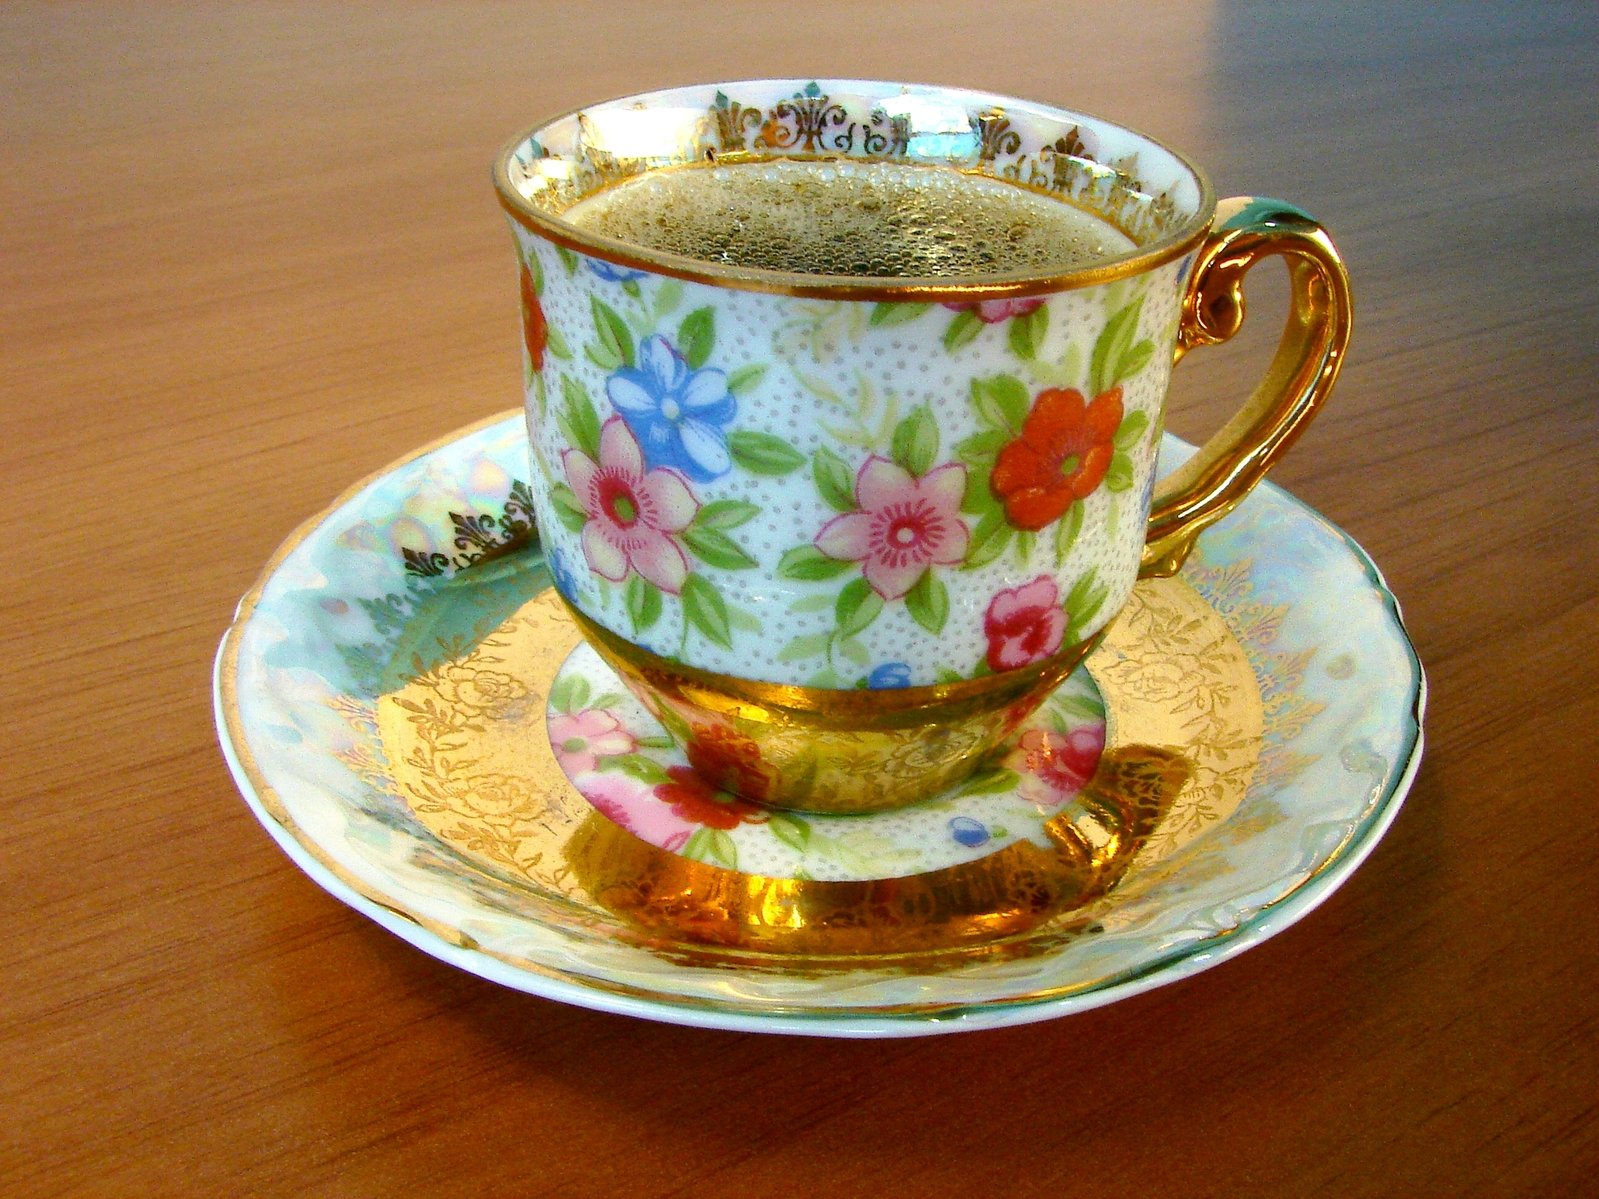 an antique cup and saucer on a wooden table